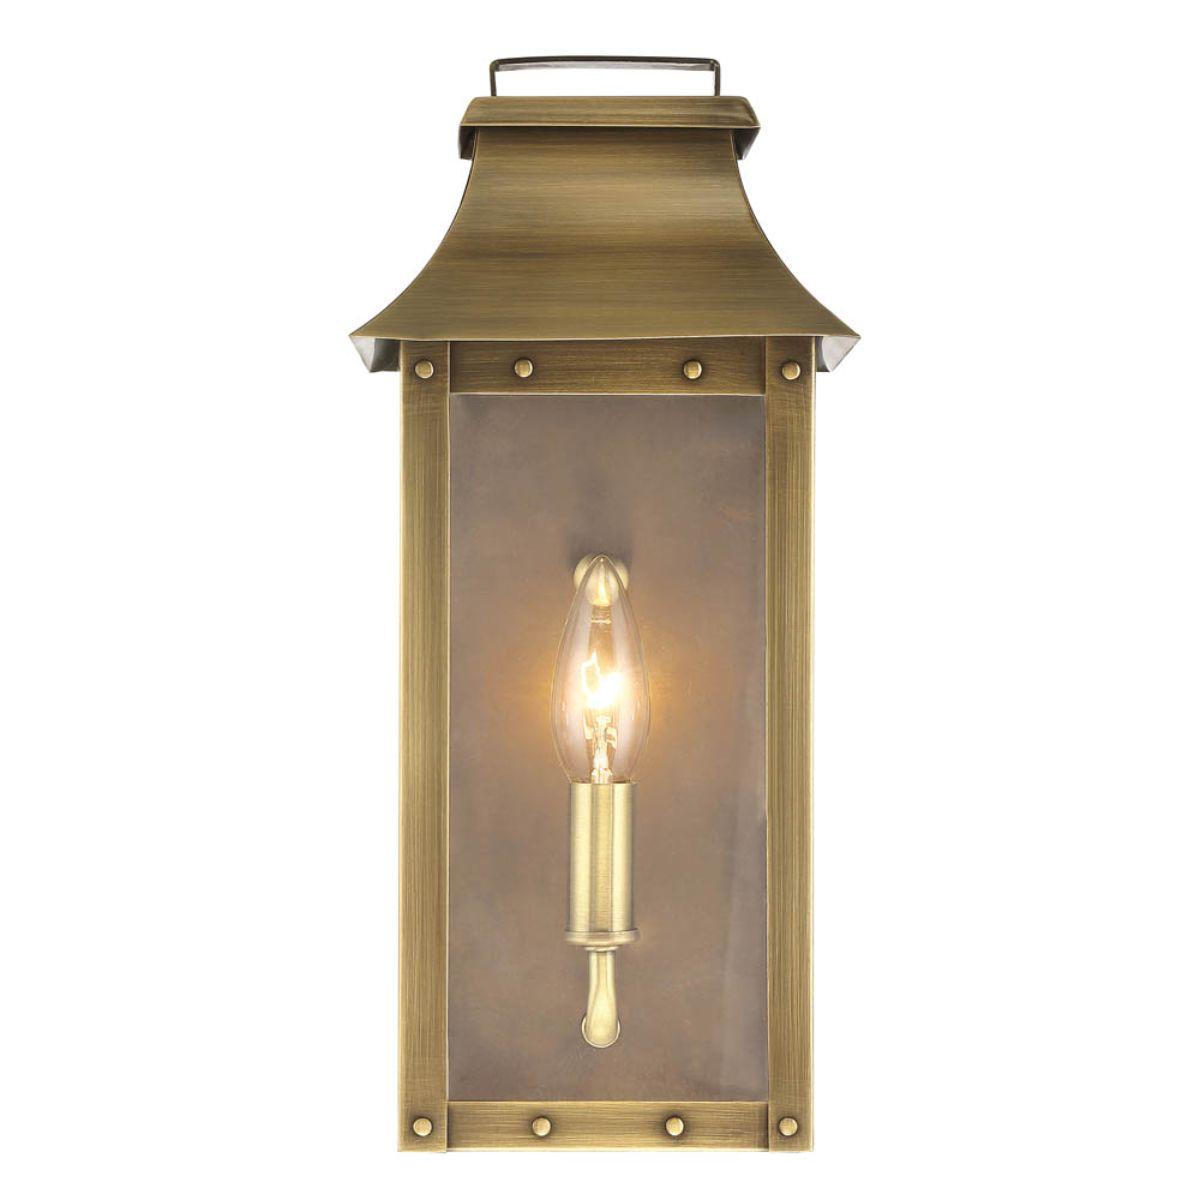 Manchester 13 In. Outdoor Wall Light